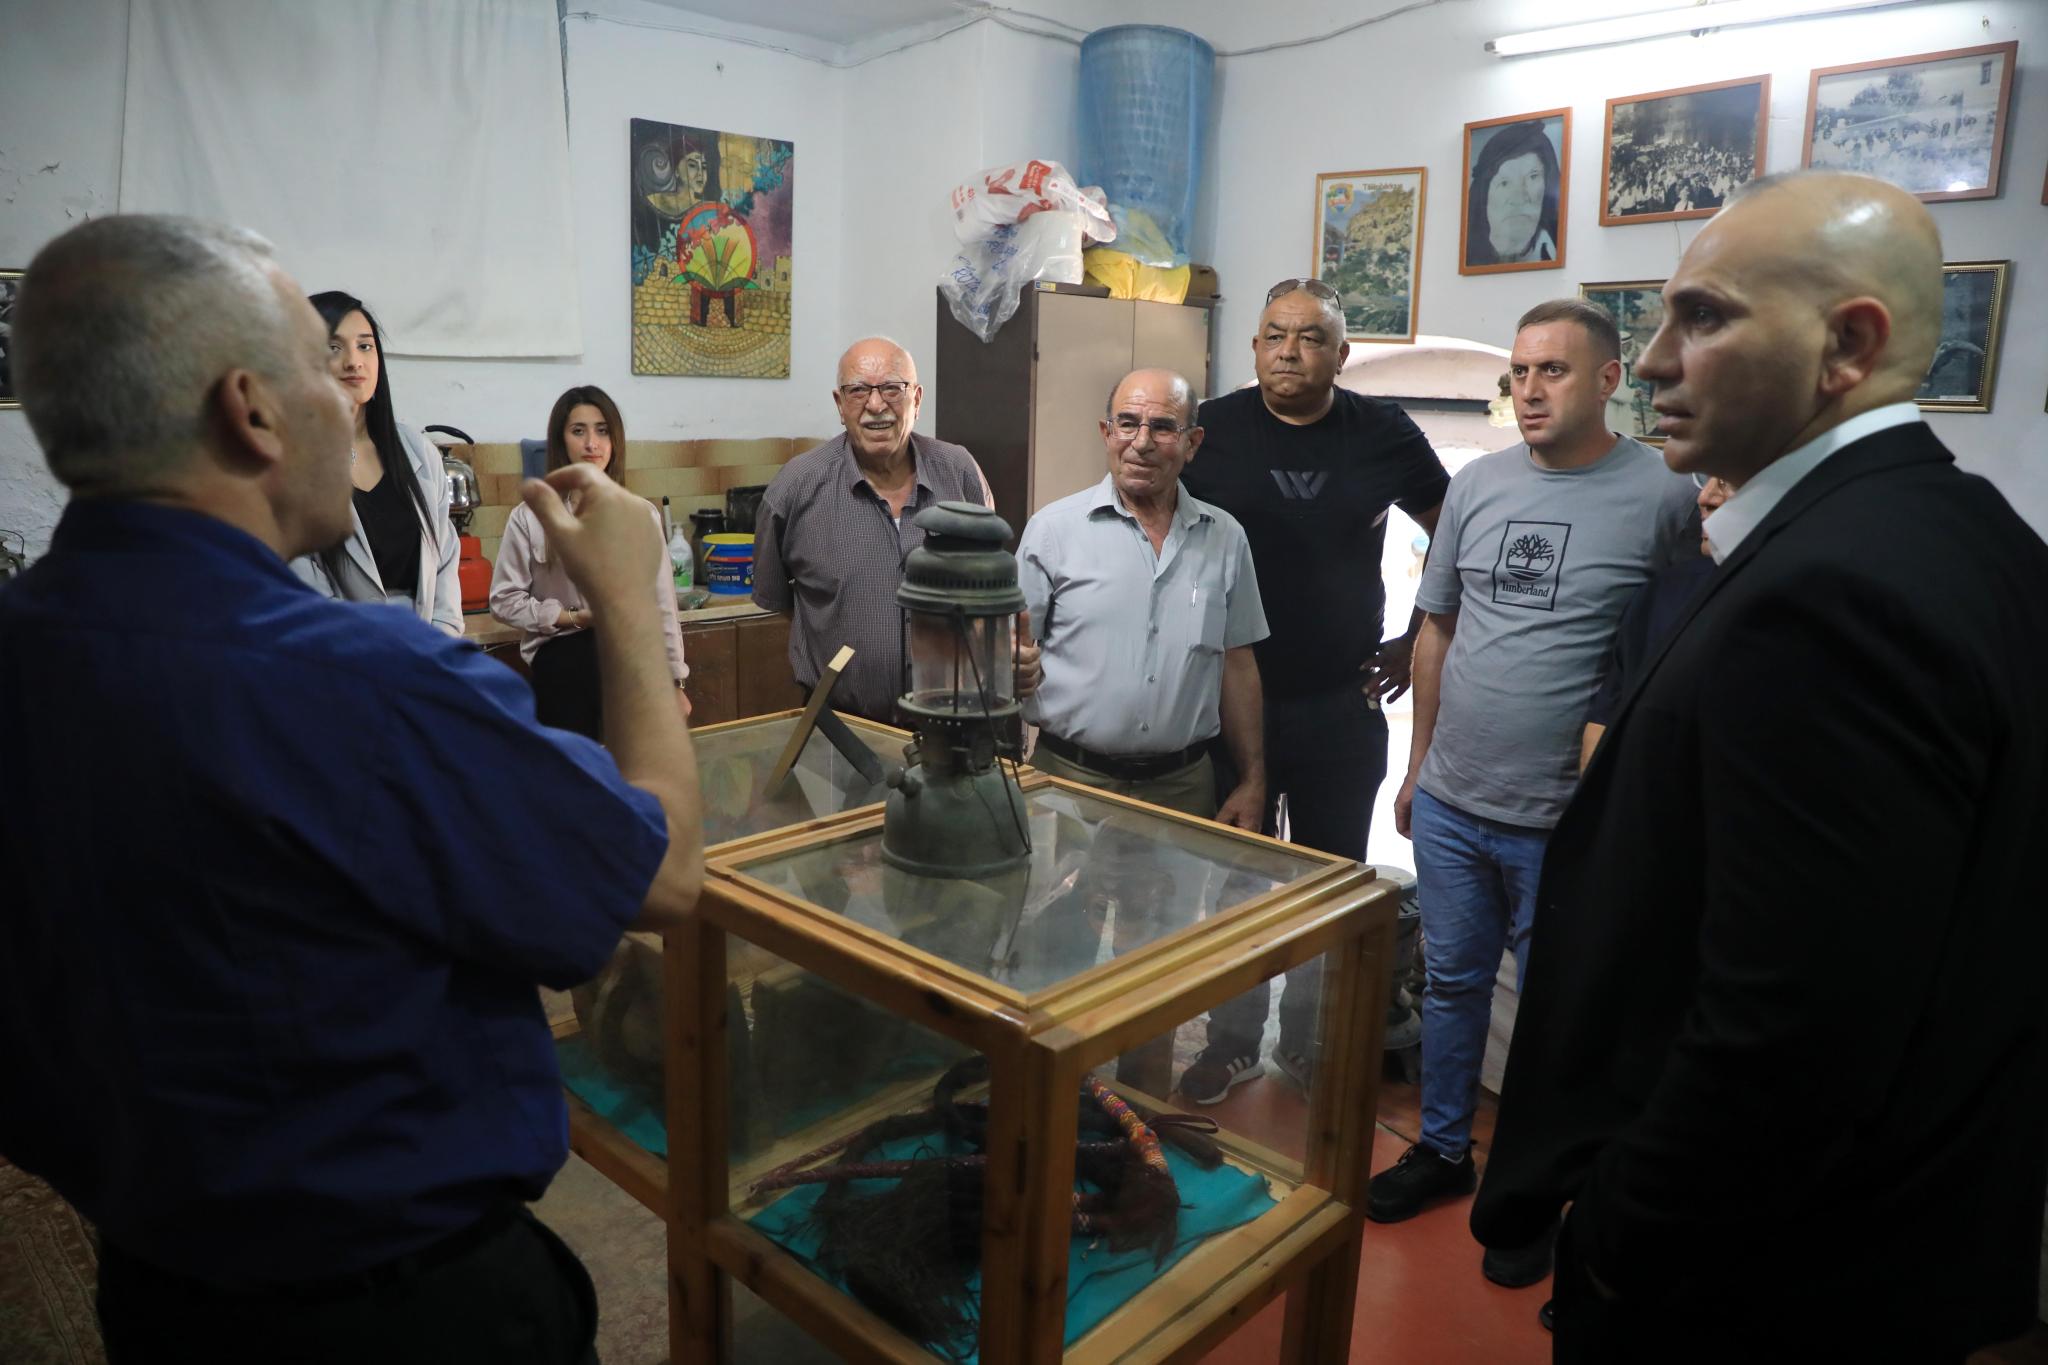 AAUP Discusses Student Matters with Sakhnin Municipality